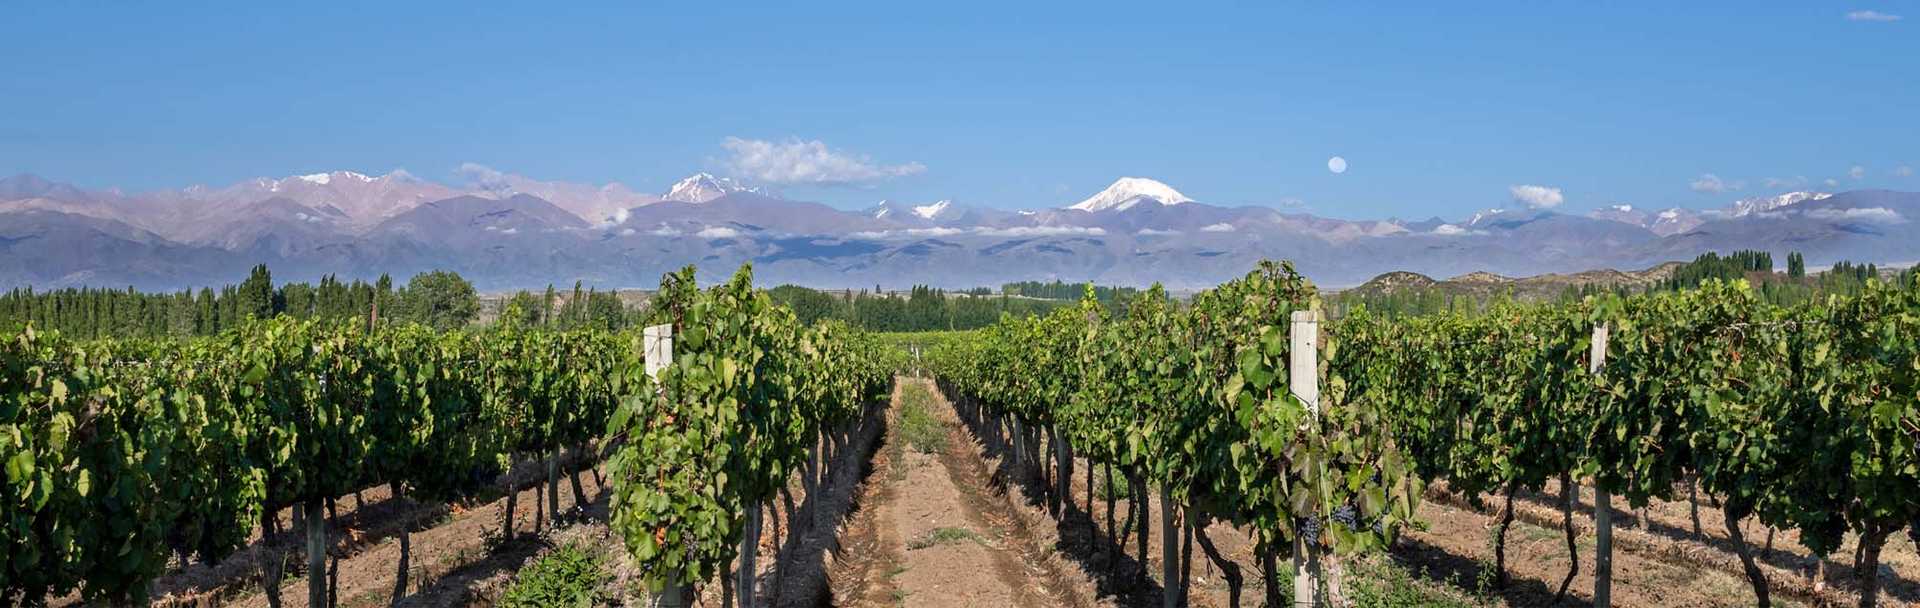 Vineyard and mountains in Mendoza, Argentina